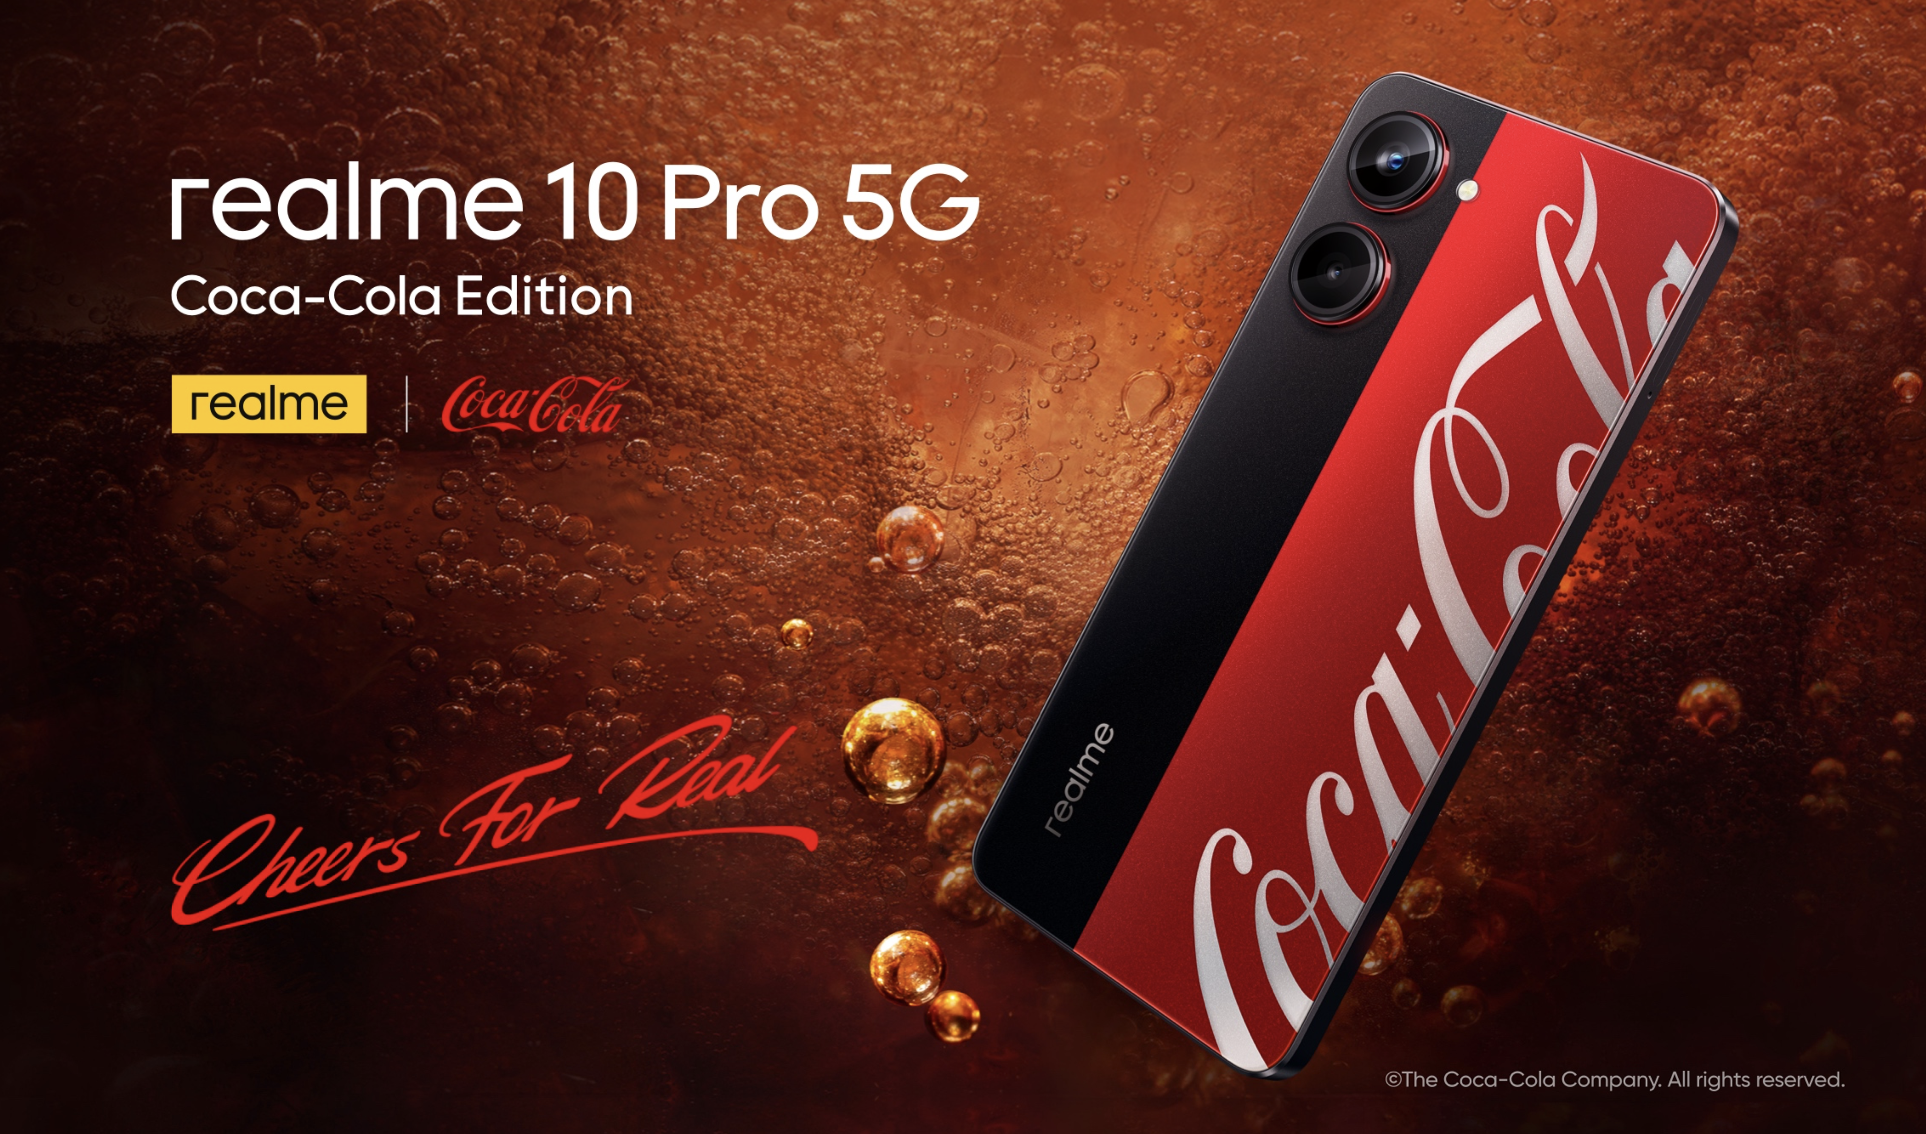 realme 10 Pro Coca-Cola Edition: a special version of realme 10 Pro with an extended package